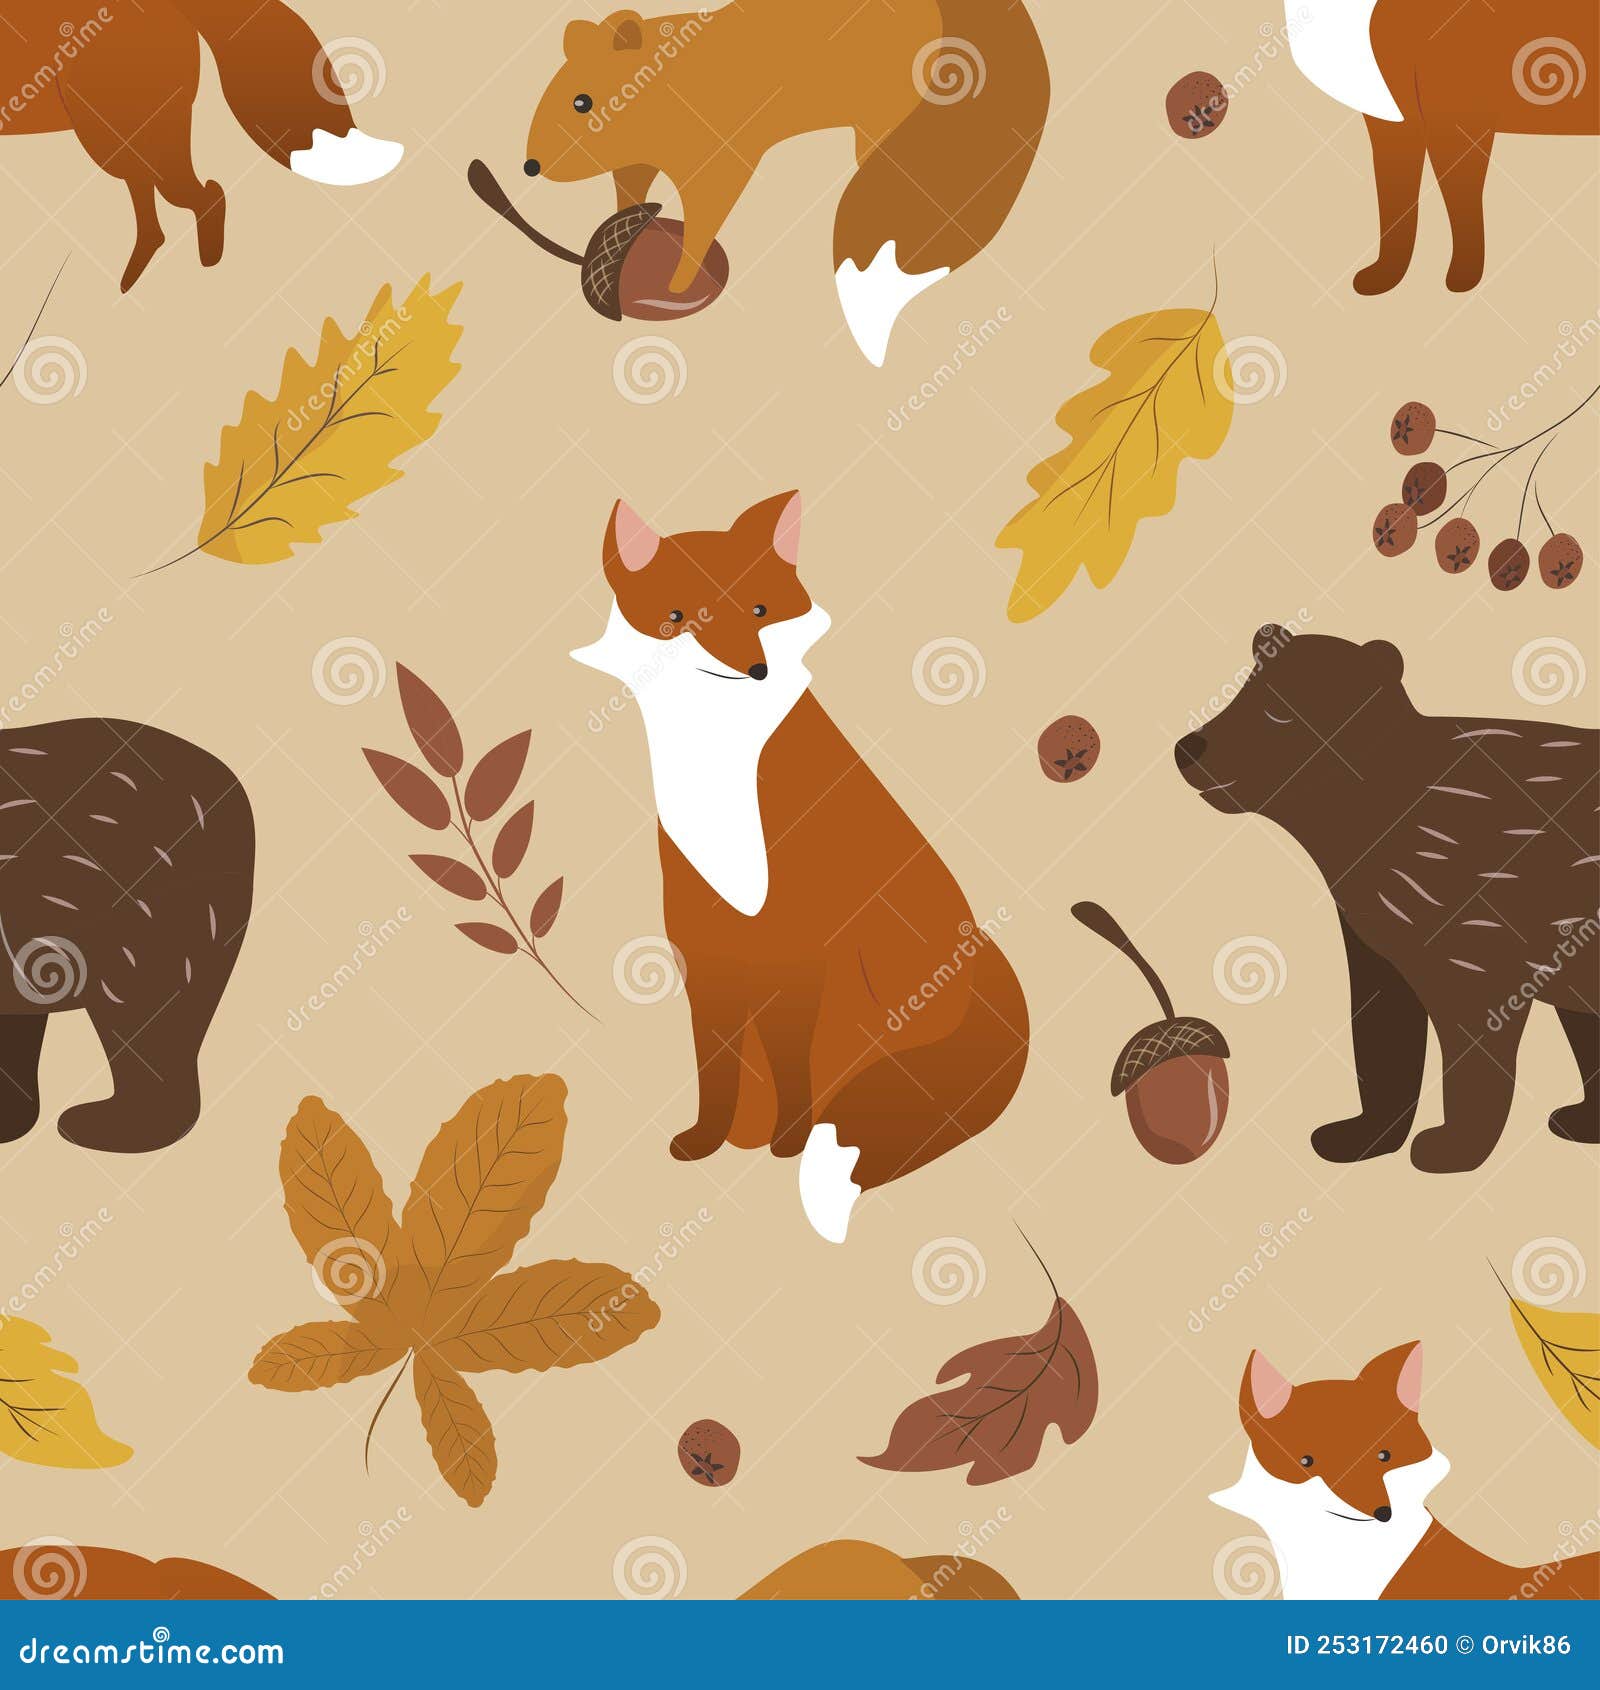 autumn seamless pattern in flat style with different cute animals - fox, squirrel, bear and autumn foliage